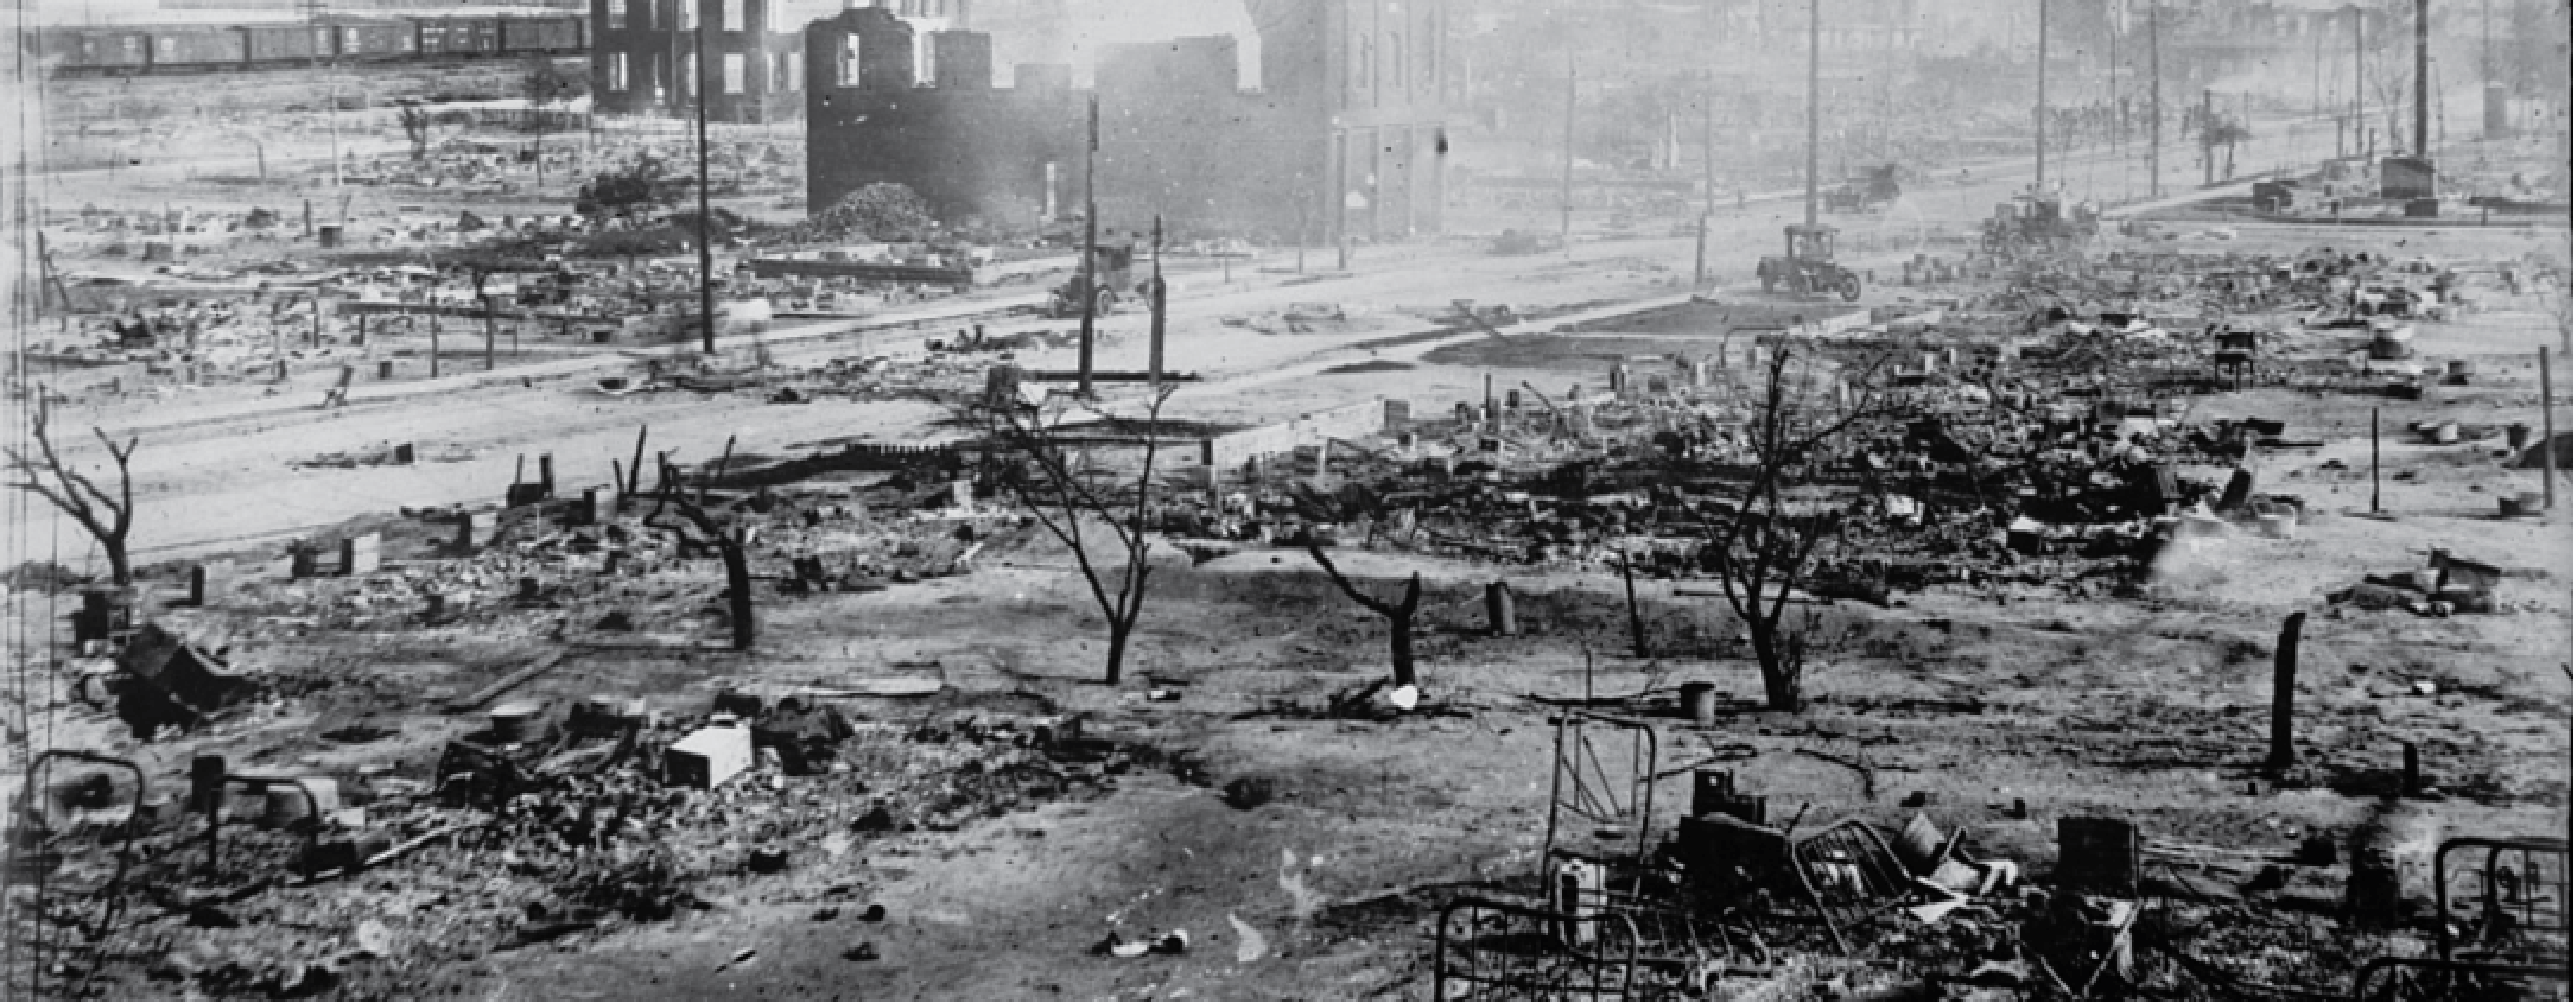 The remnants of "Black Wall Street" following the Tulsa Race Massacre in 1921.